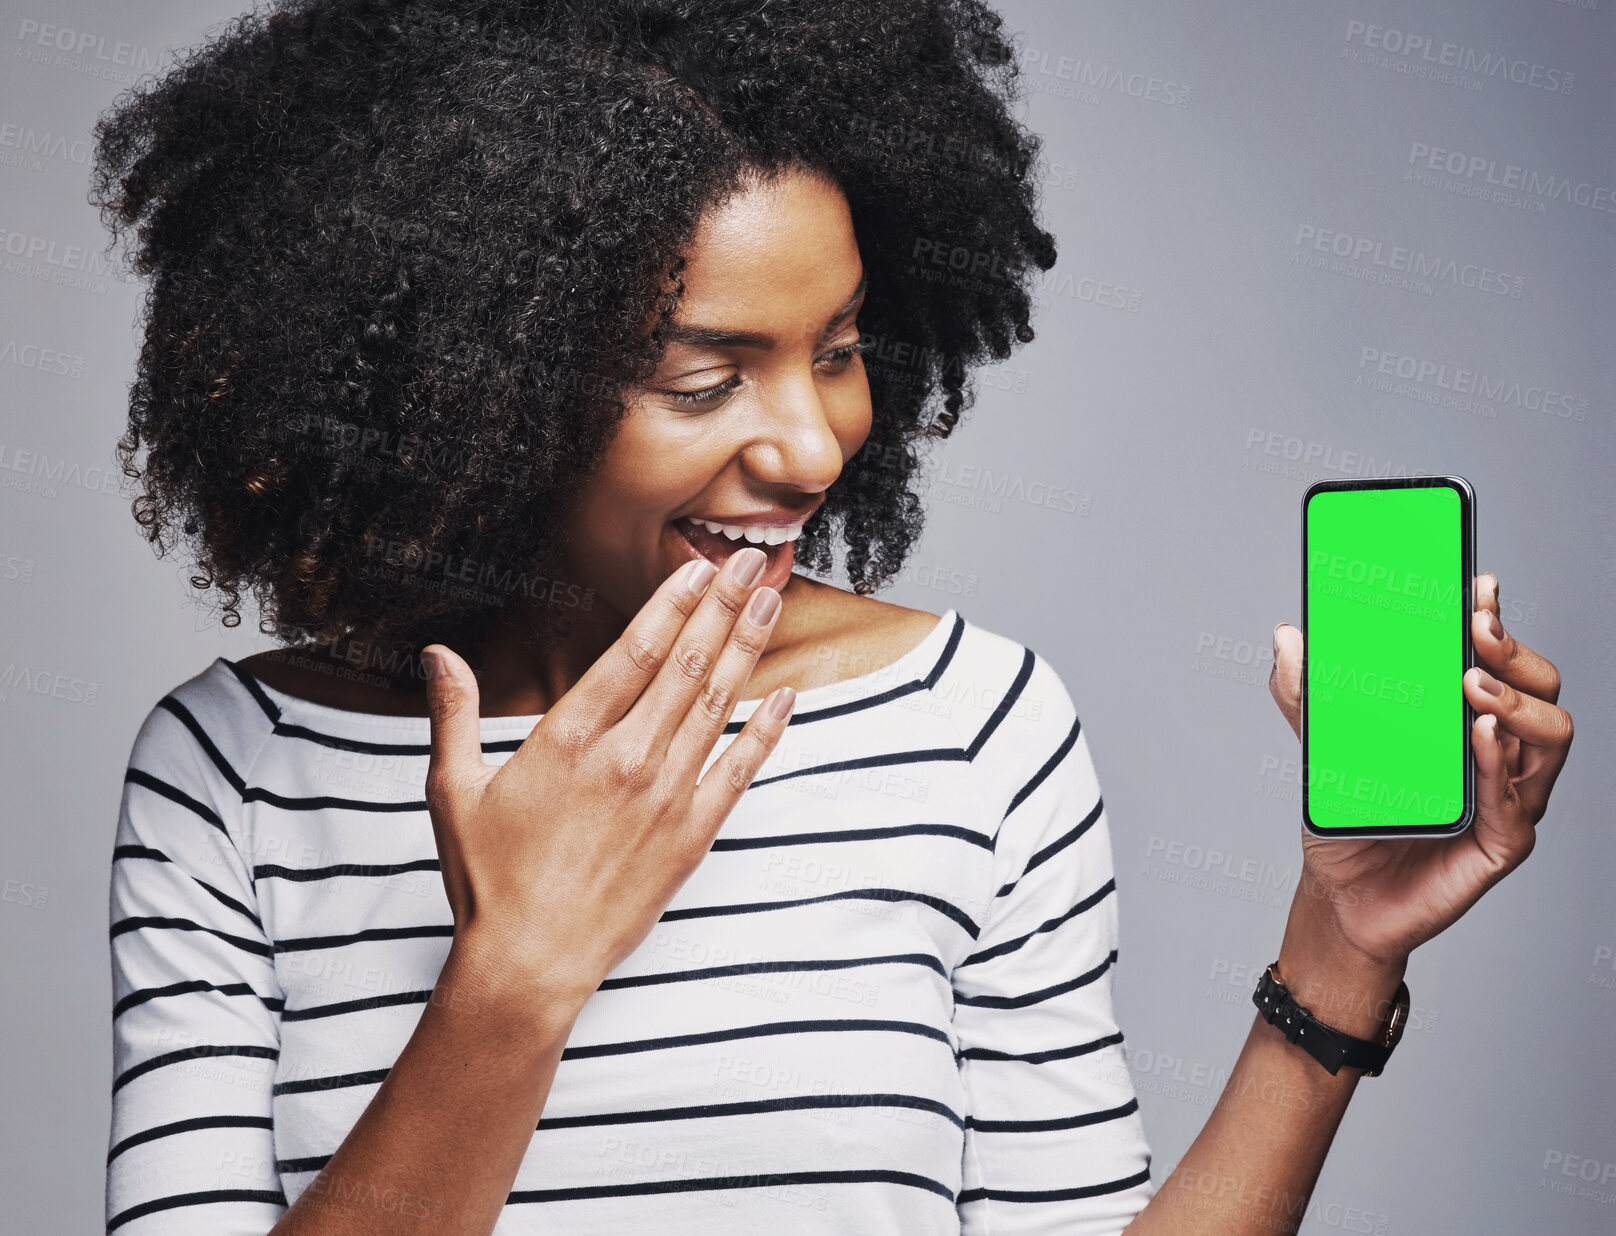 Buy stock photo Studio shot of a young woman showing a smartphone with a green screen against a gray background